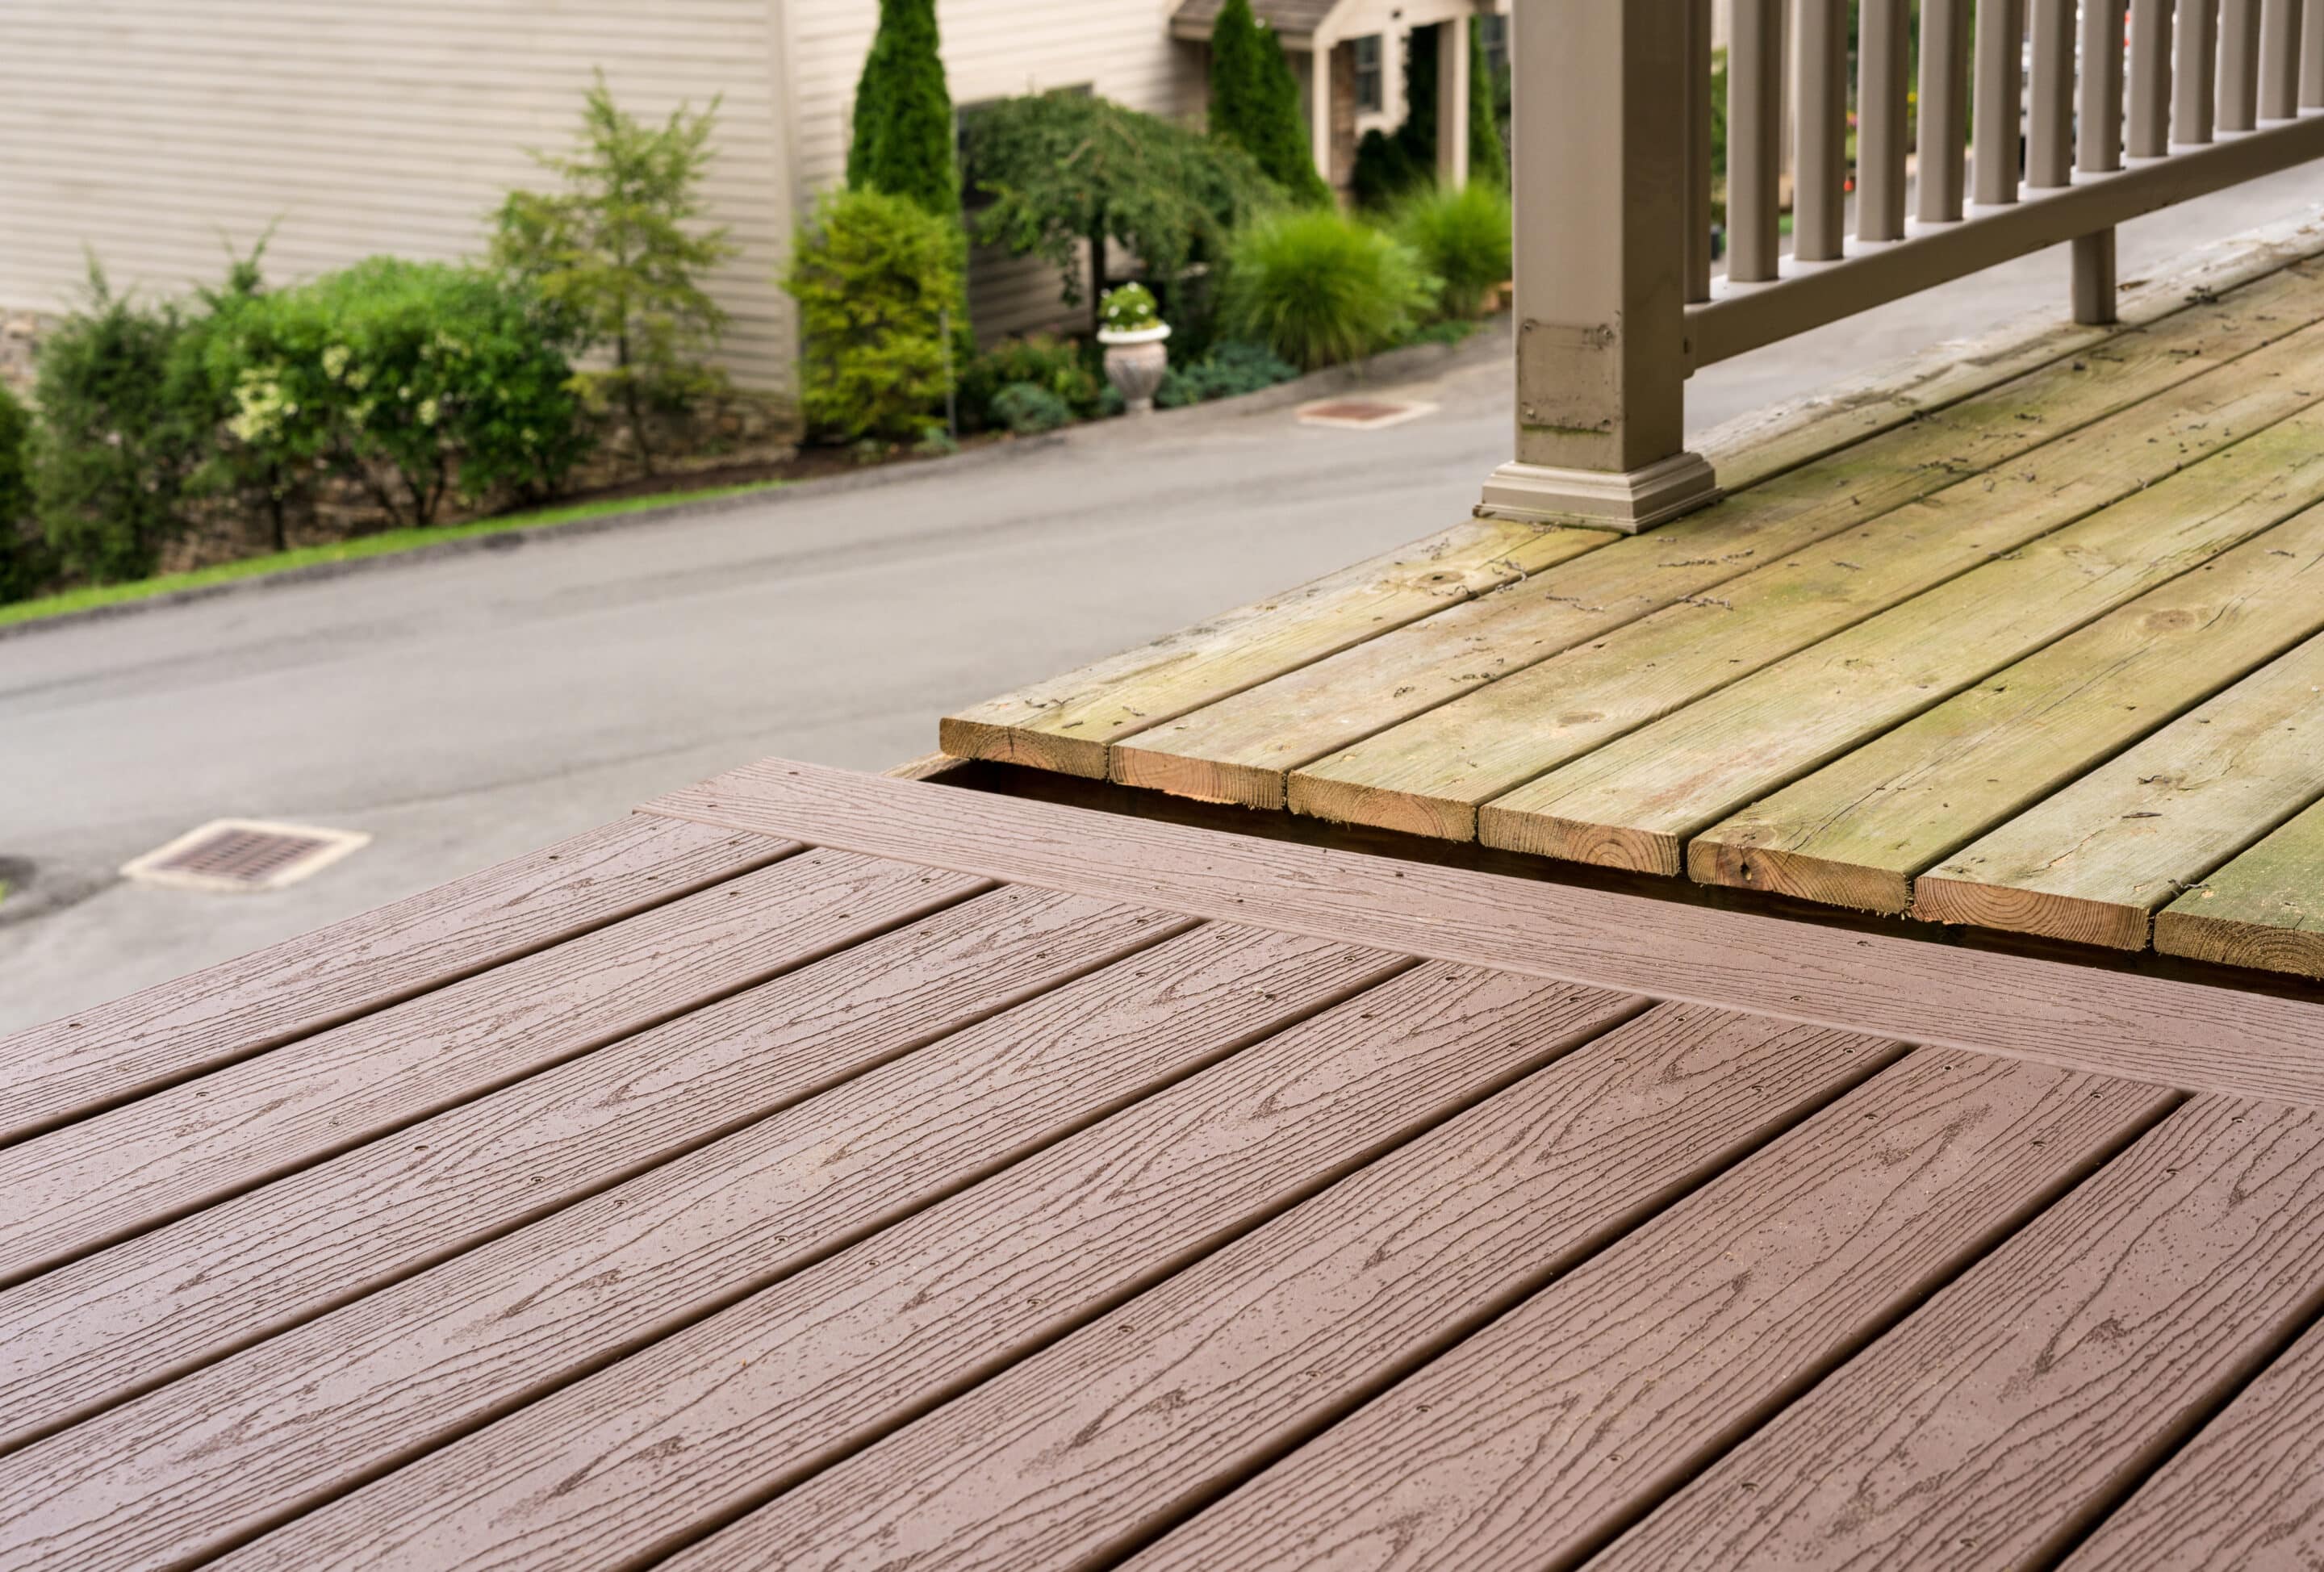 How to Choose the Right Materials for Your Deck